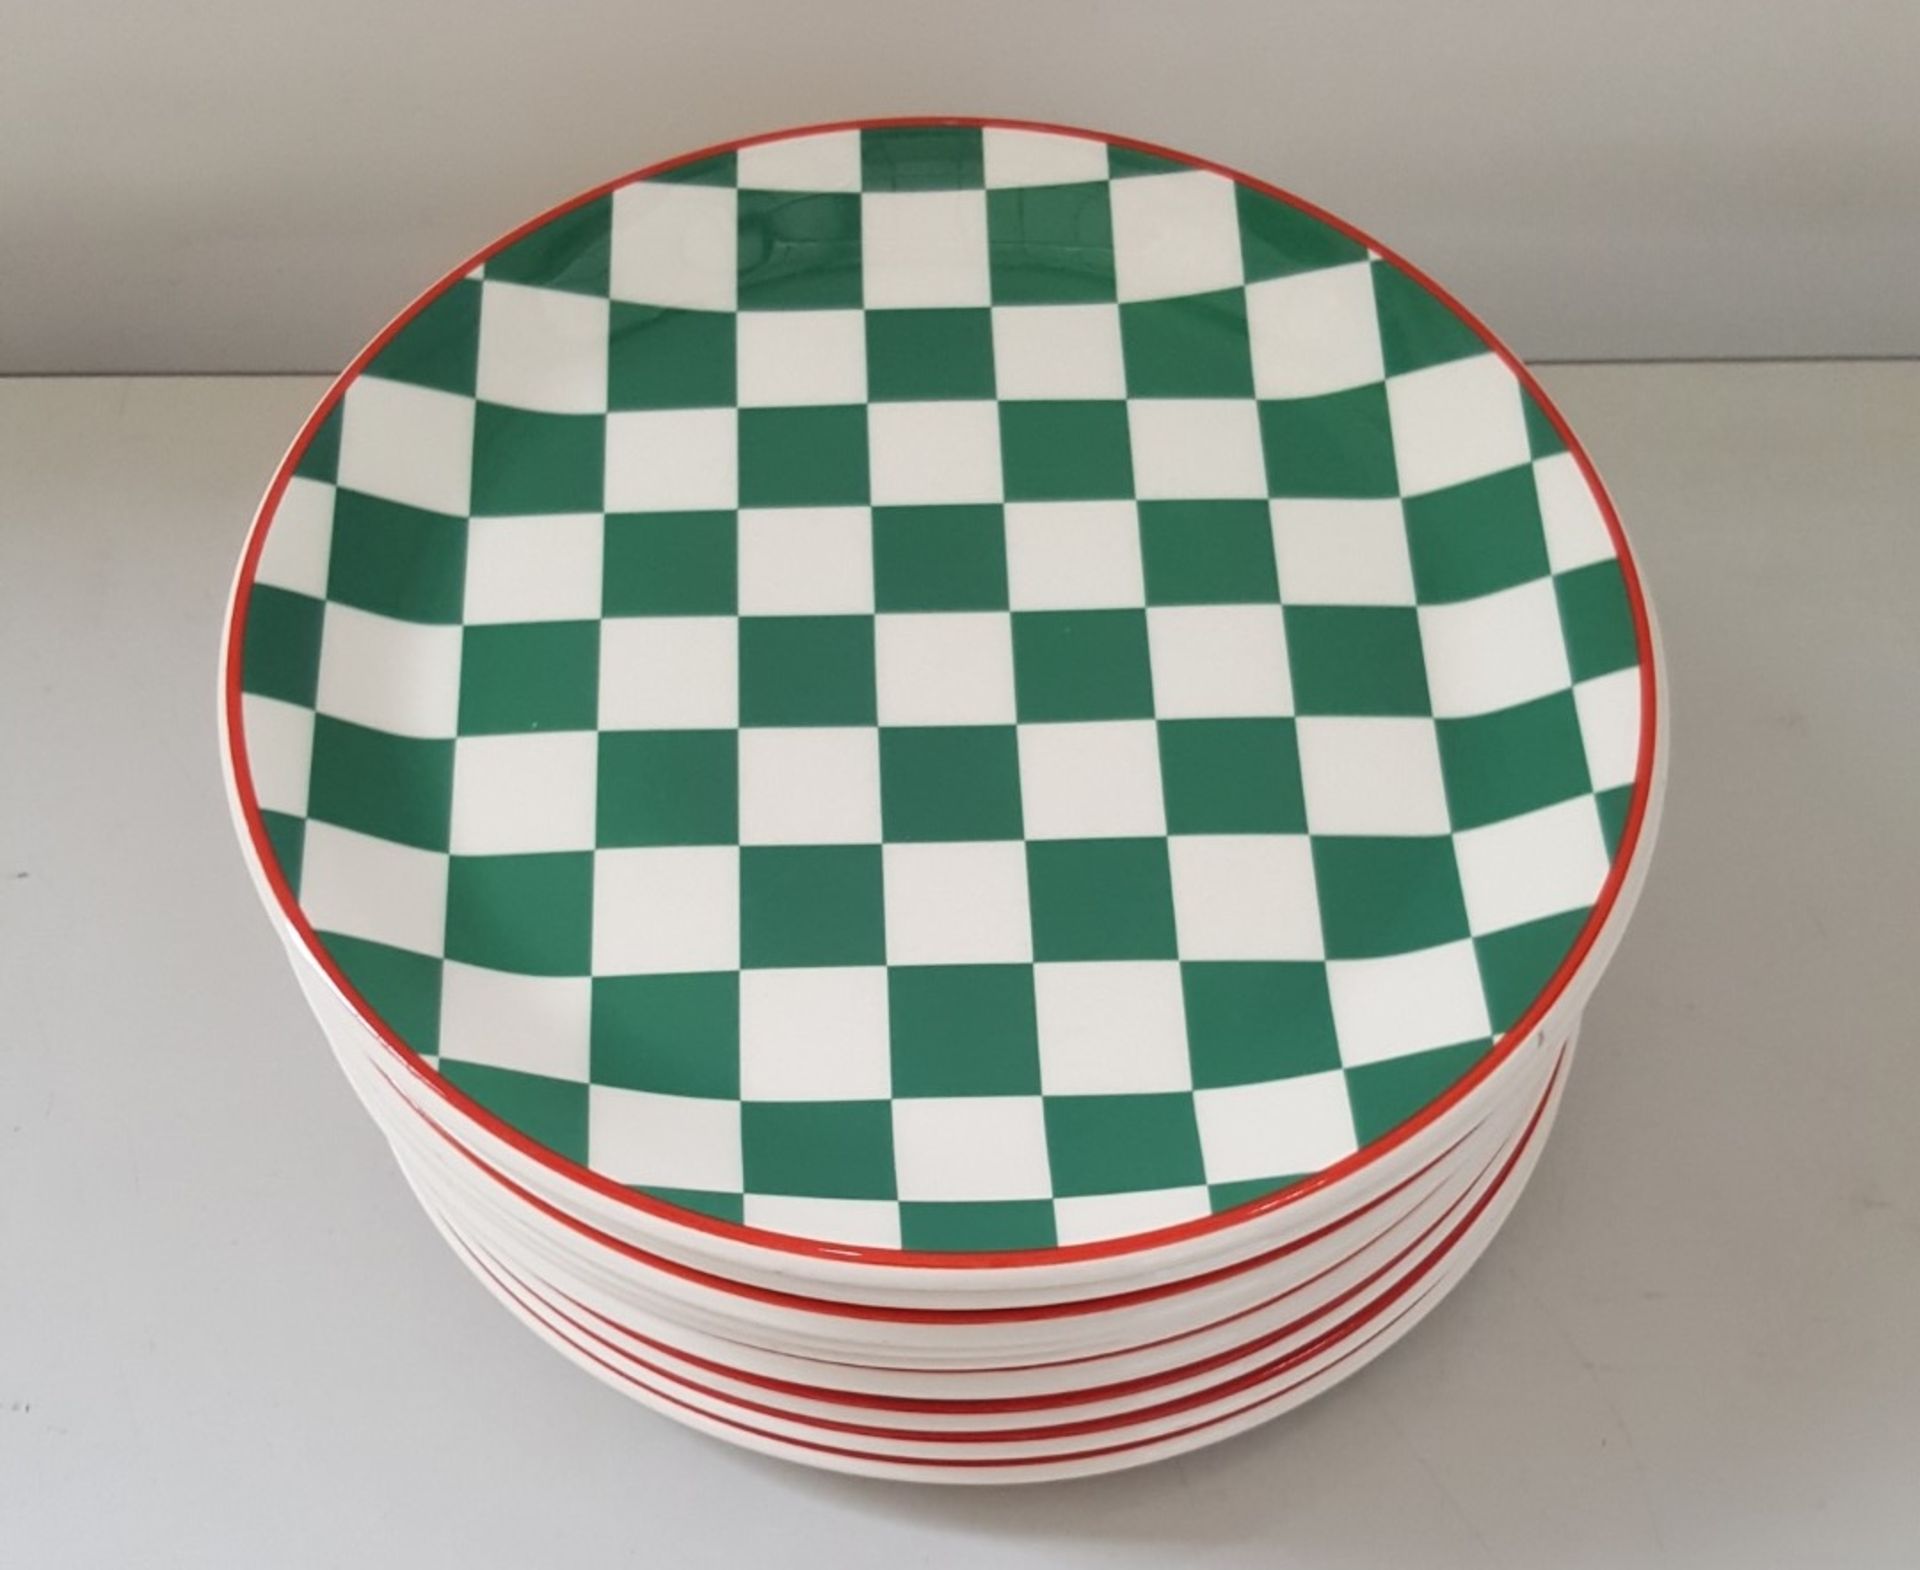 14 x Steelite Plates Checkered Green&White With Red Outline 25CM - Ref CQ278 - Image 2 of 4